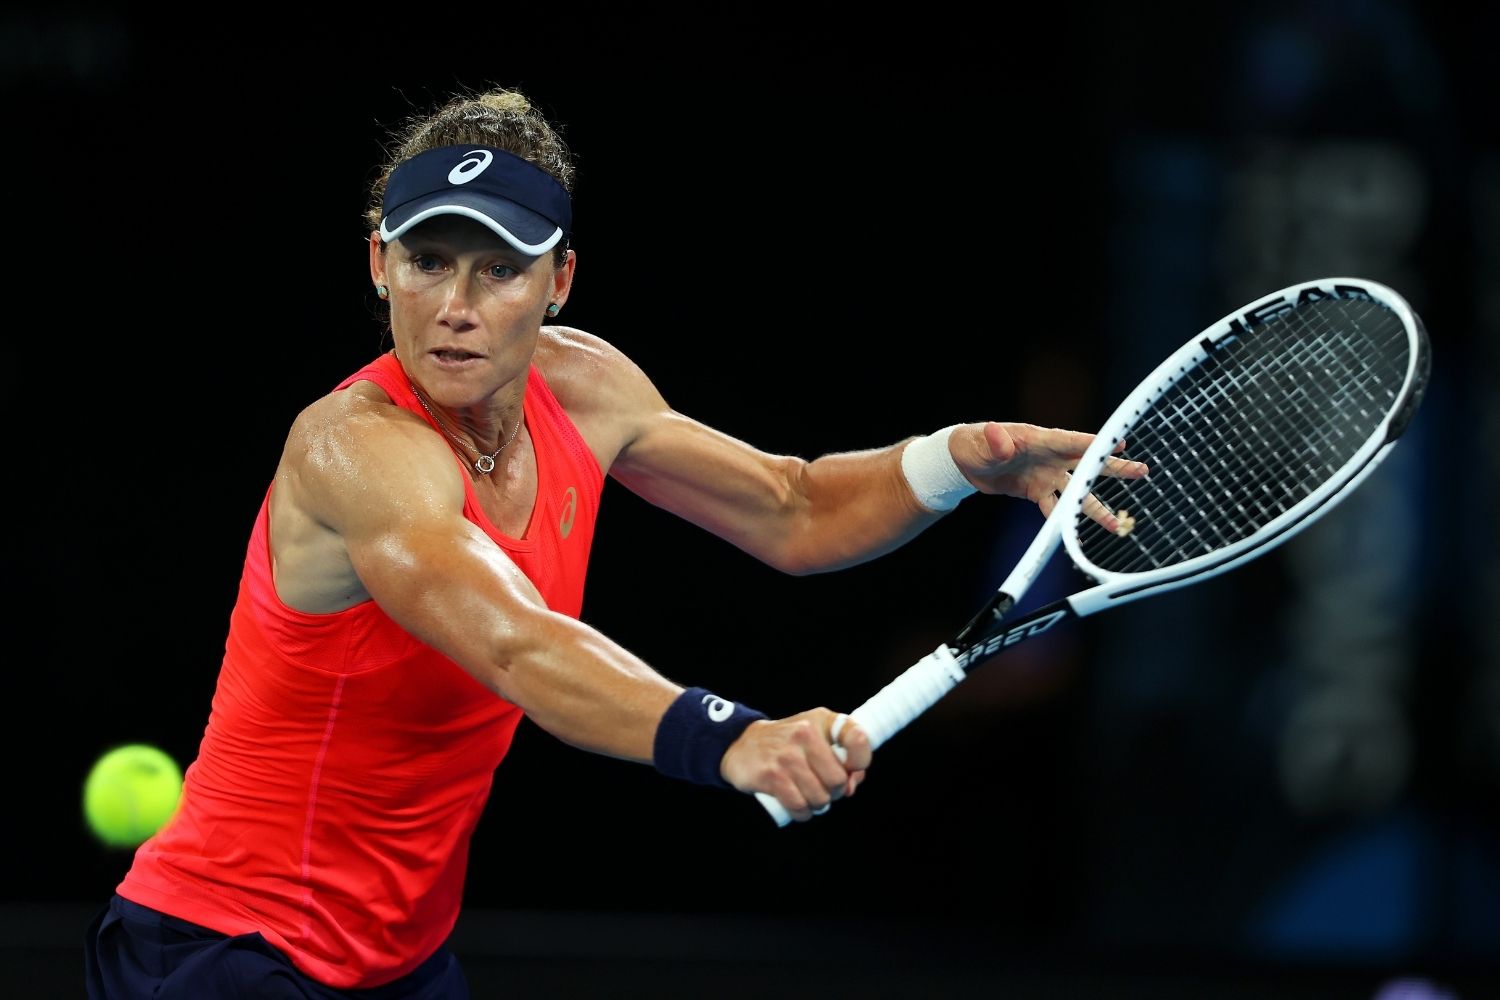 sam-stosur-on-court-red-top